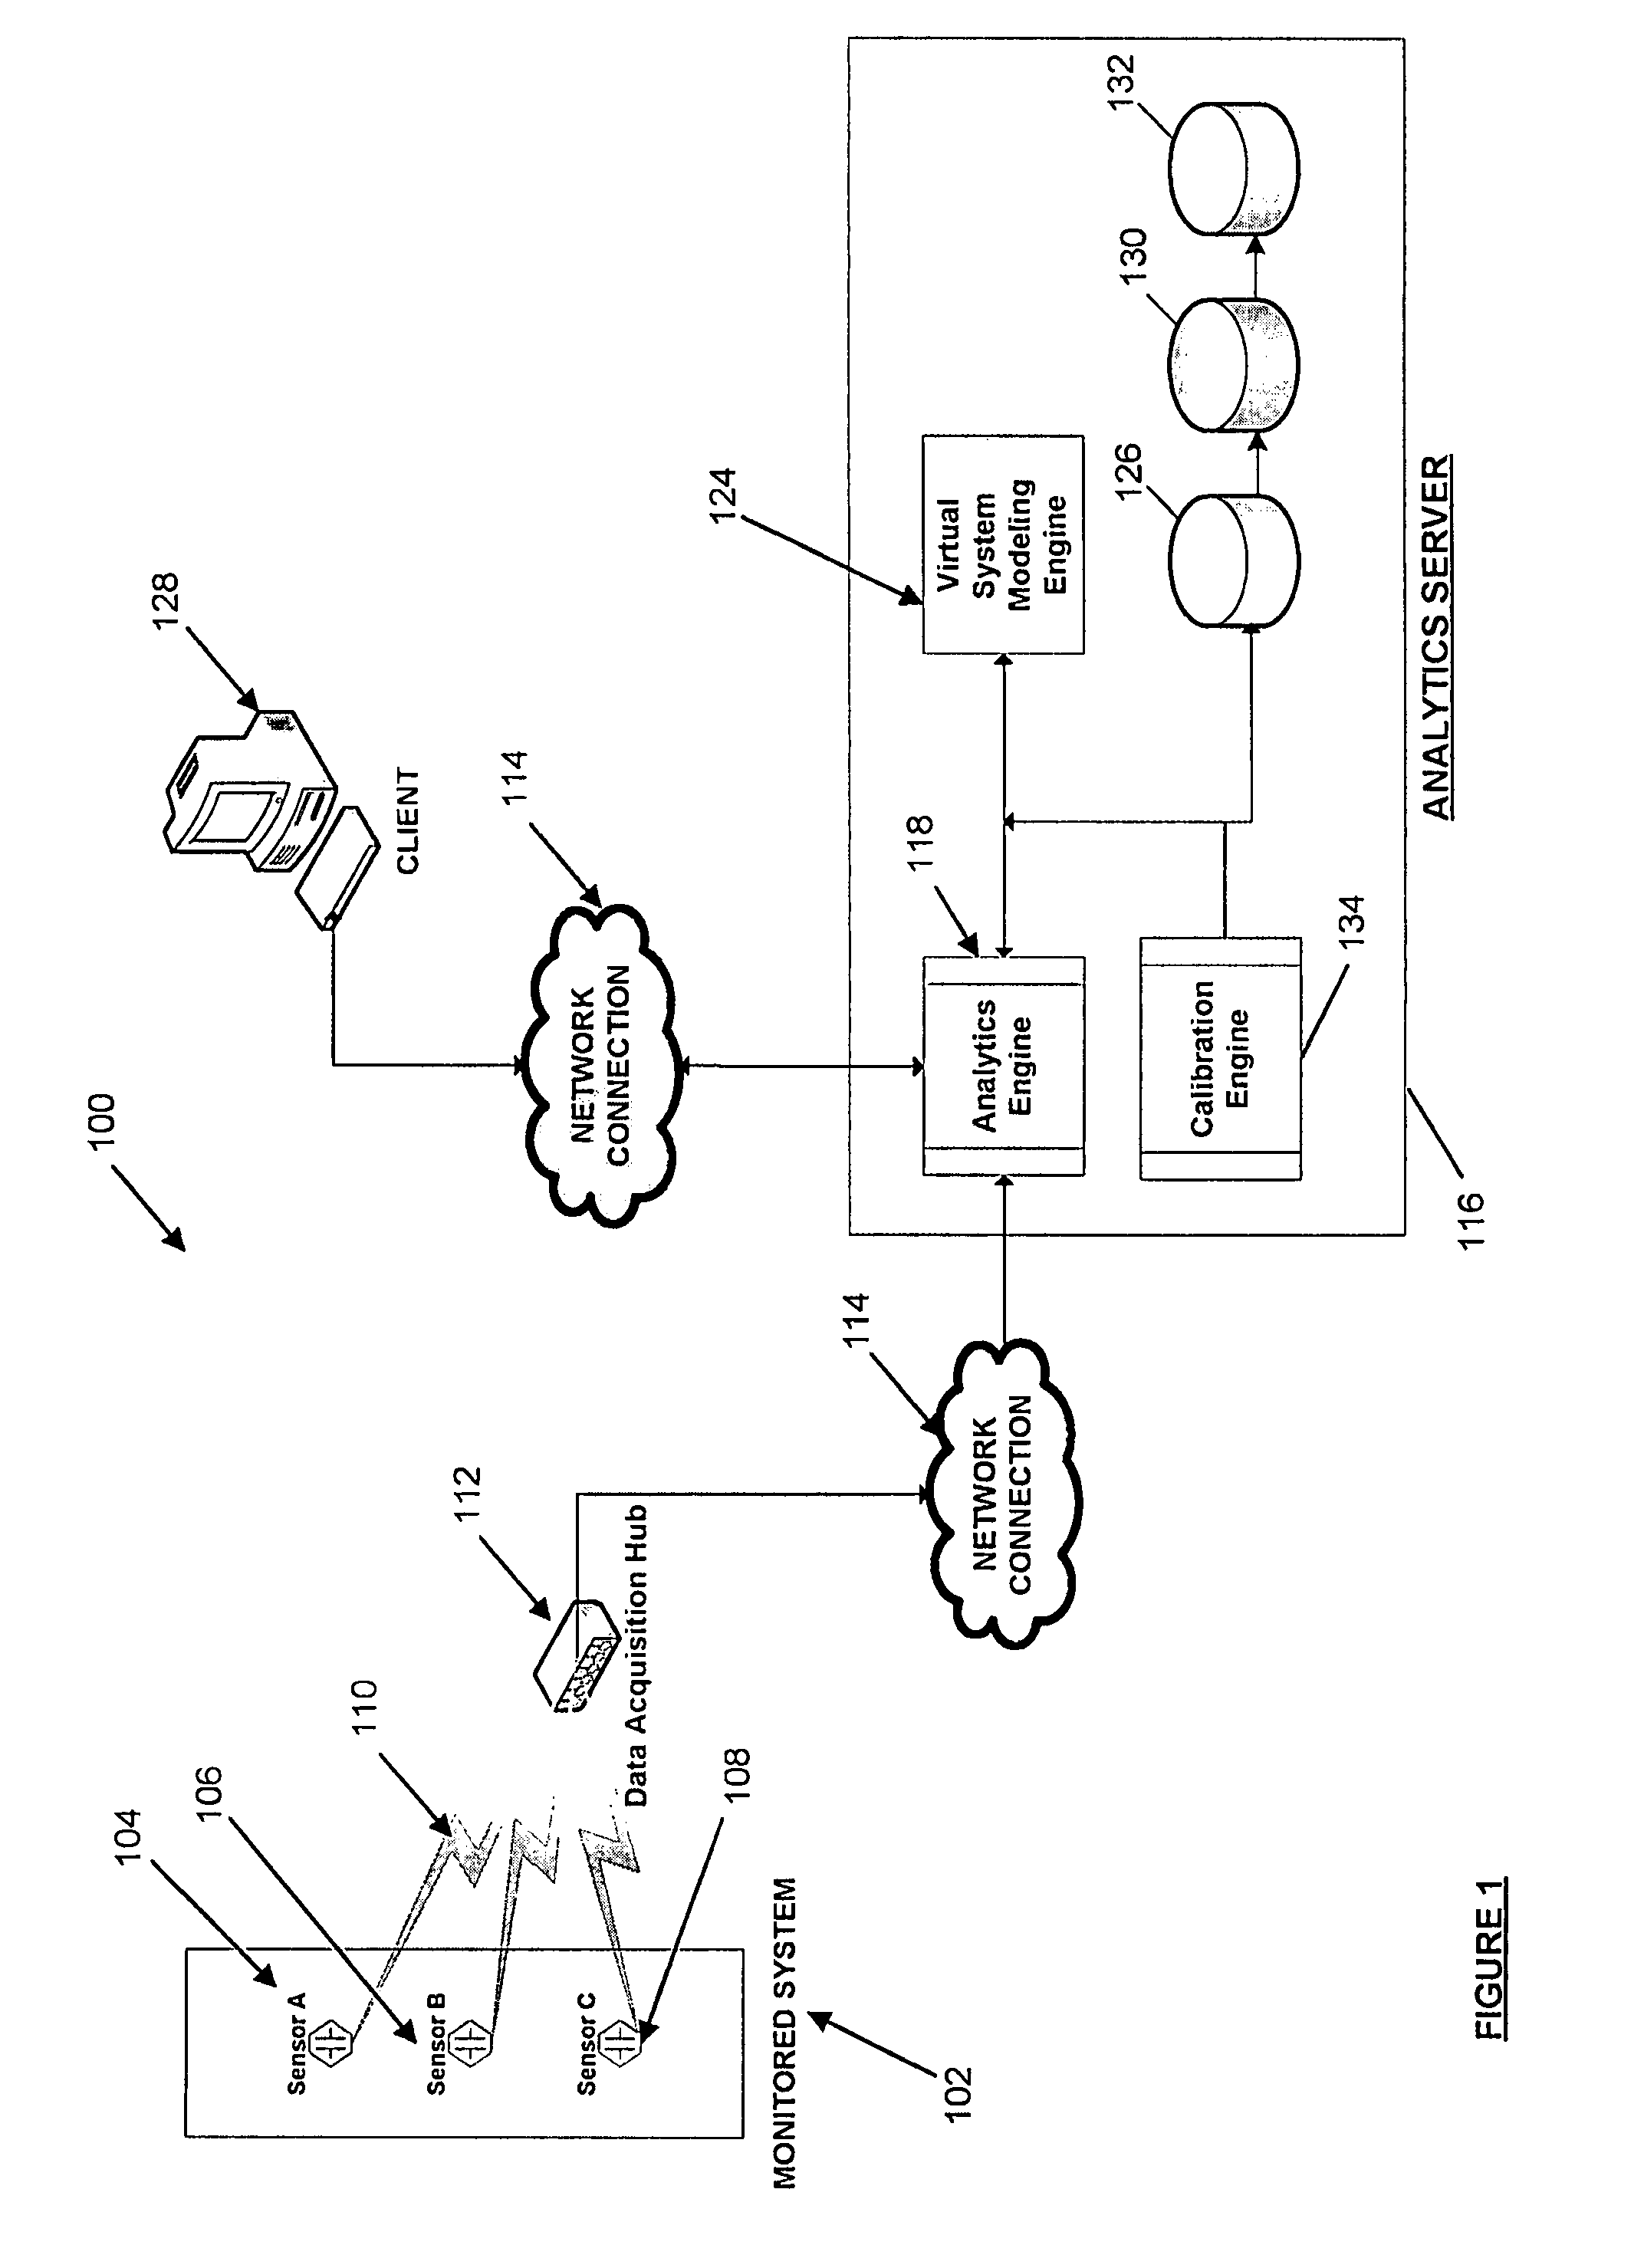 Systems and methods for automatic real-time capacity assessment for use in real-time power analytics of an electrical power distribution system